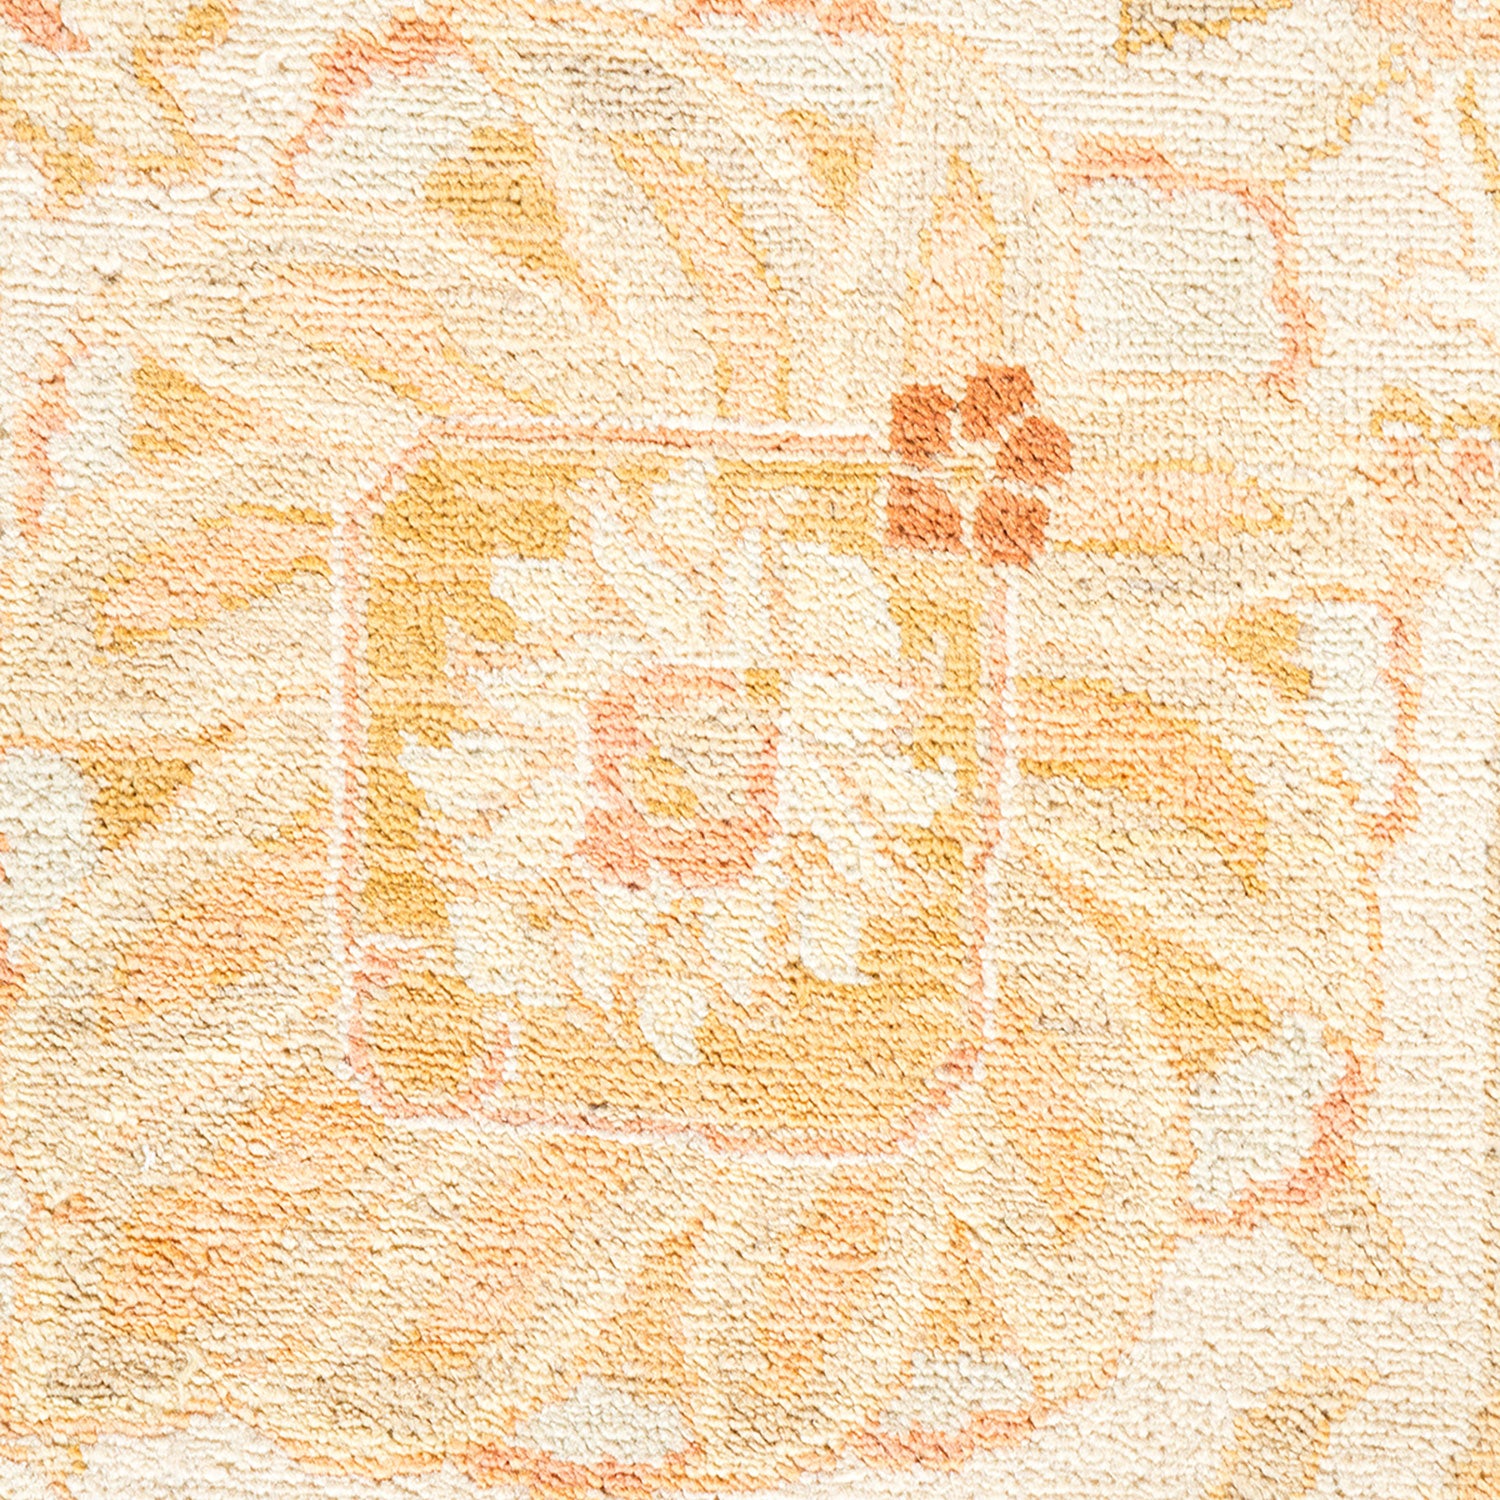 Close-up of a soft, multicolored floral fabric with plush texture.